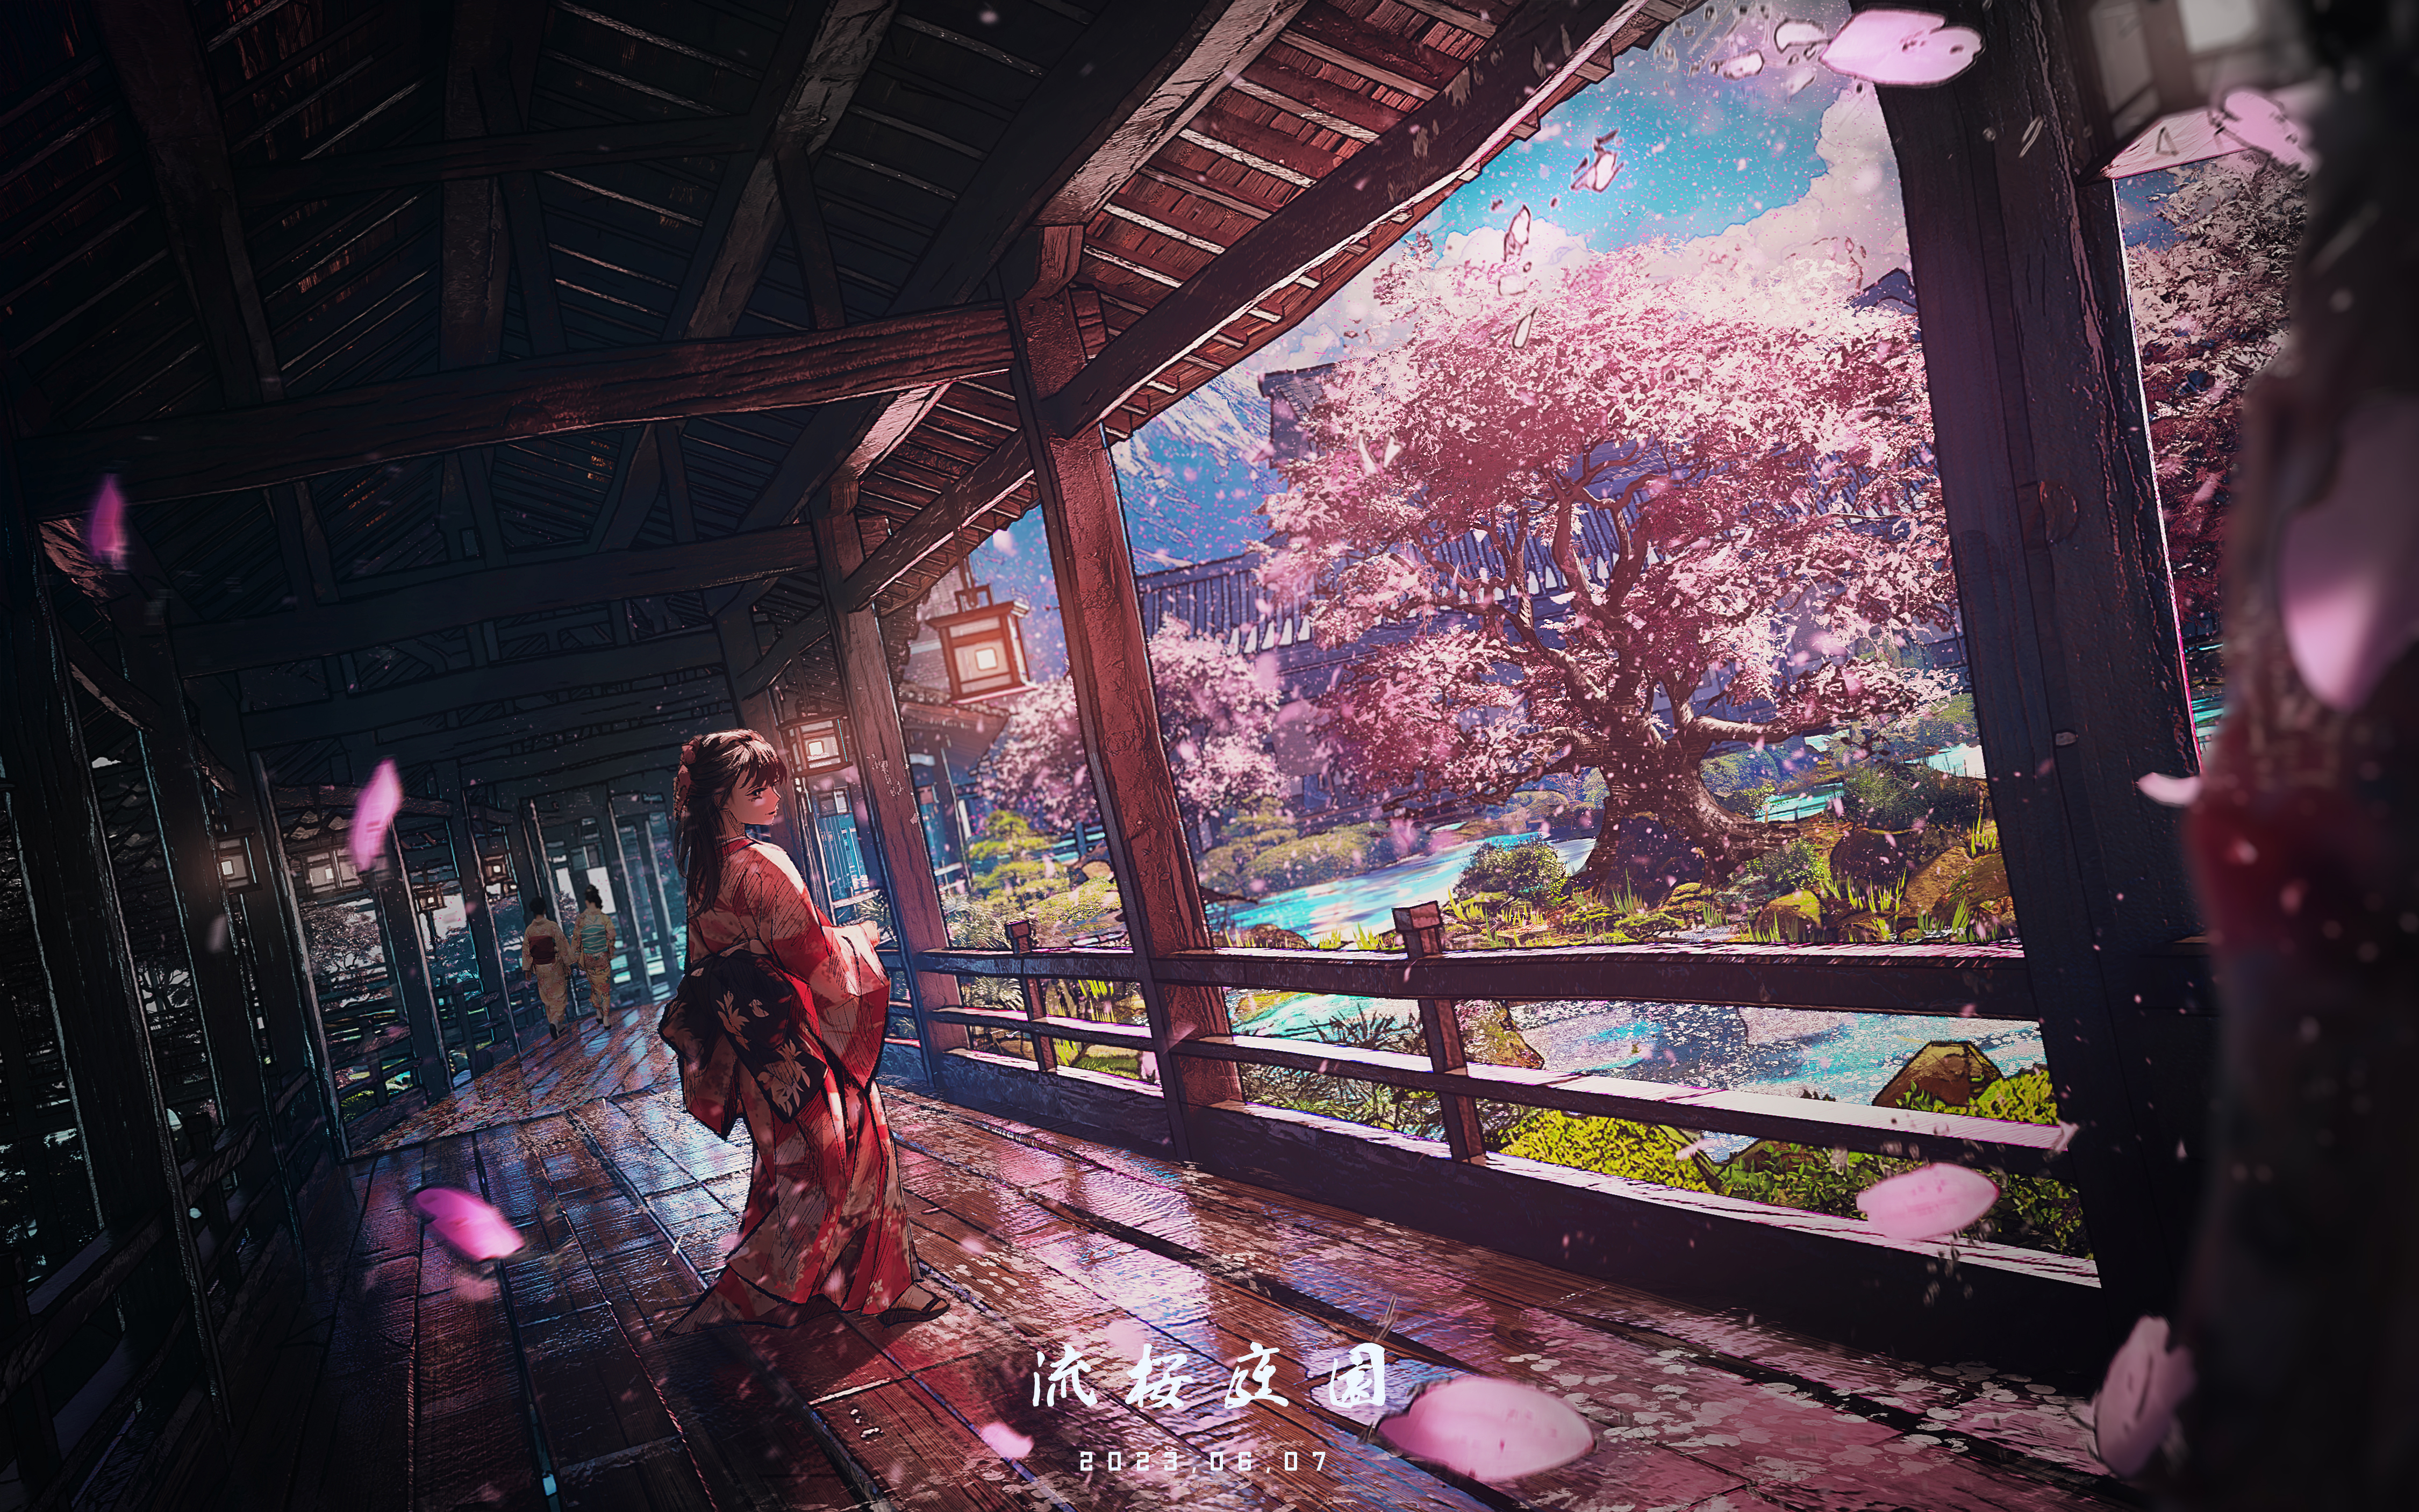 Anime 4500x2813 anime girls architecture Japanese clothes trees floor kimono cherry blossom petals depth of field lantern blurry background pond Asian architecture plants black hair long hair group of women grass garden Japanese mountains railing flowers